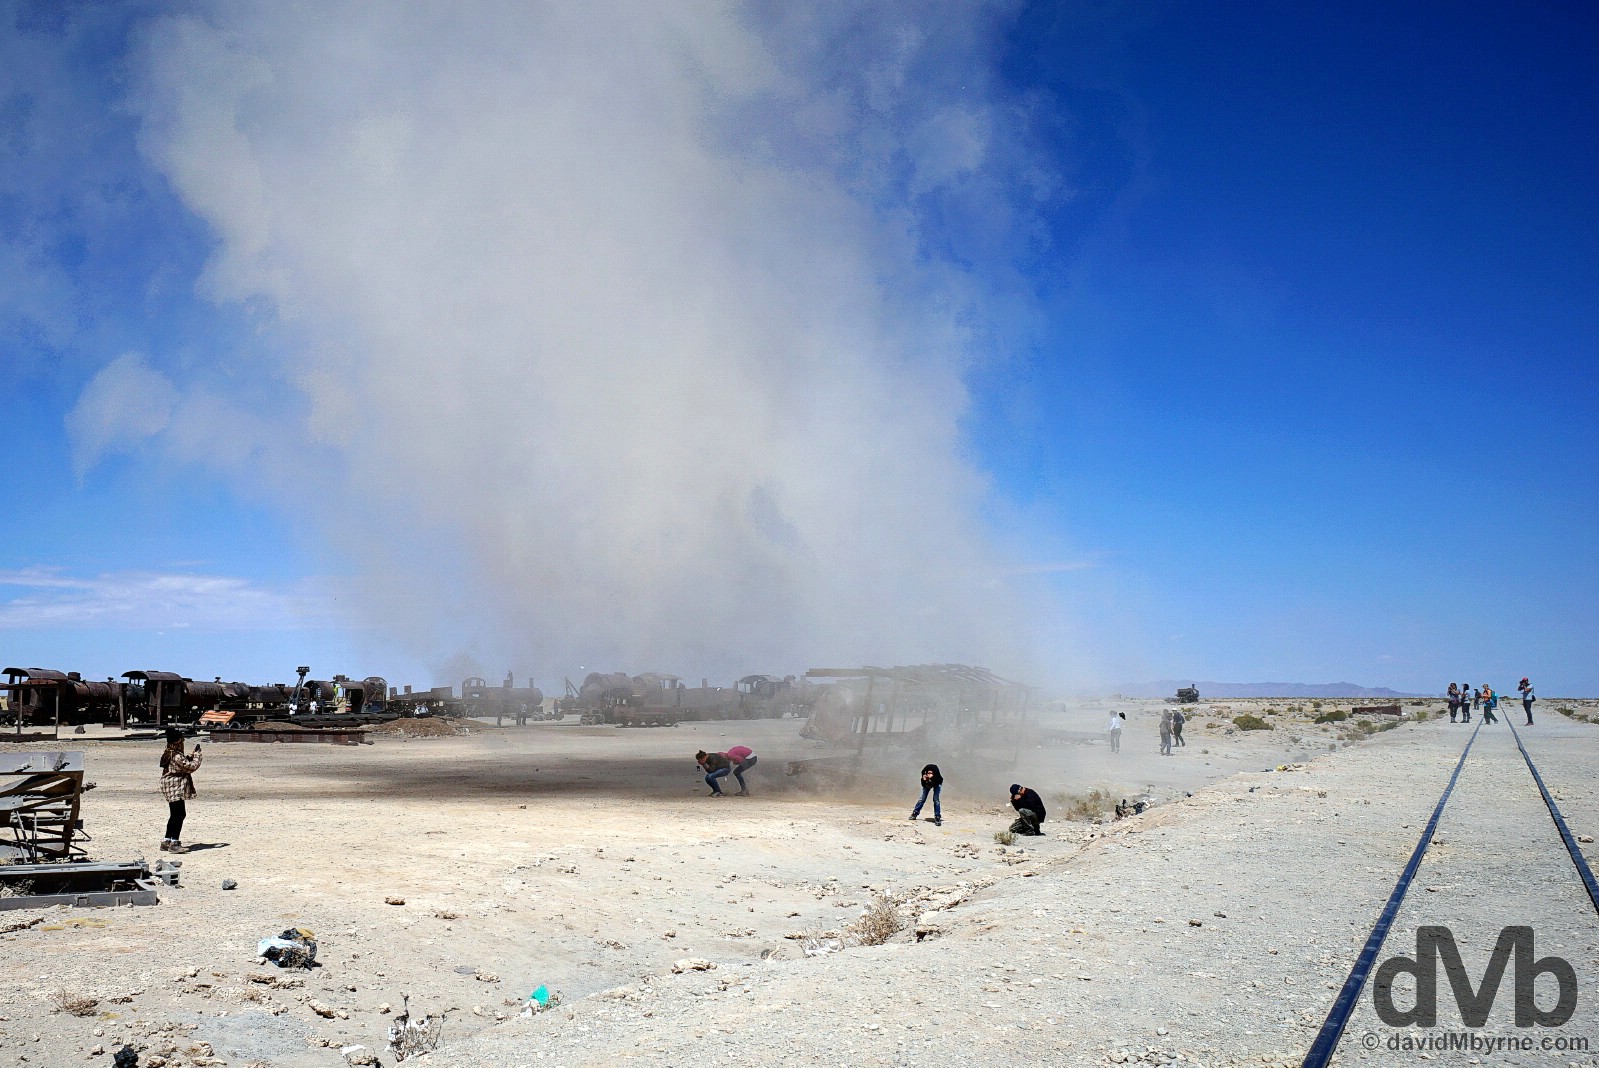 A sand twister at the Train Cemetery on the outskirts of Uyuni, southern Bolivia. September 3, 2015.